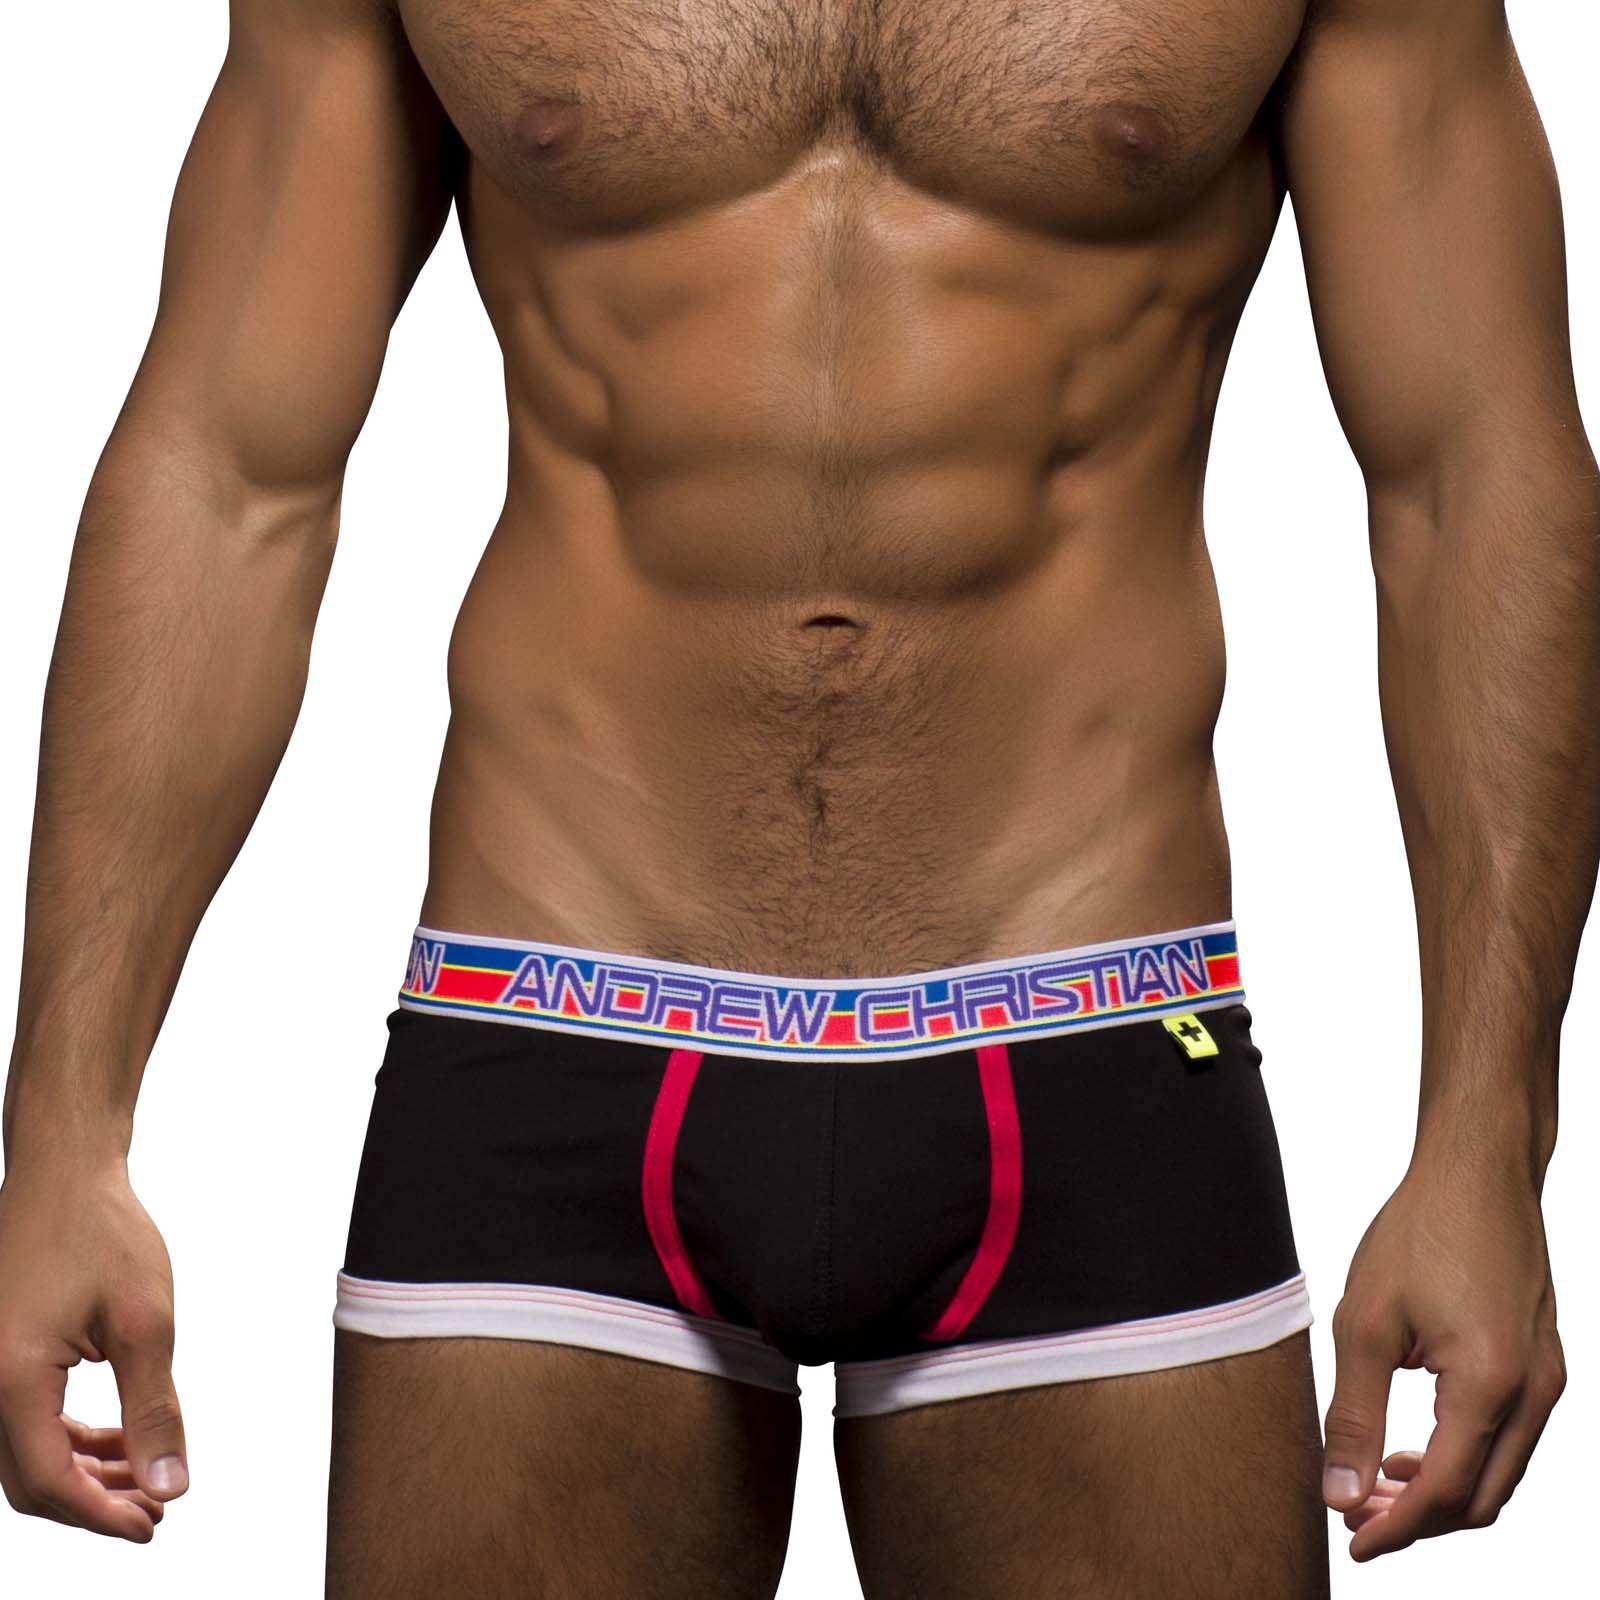 Boxer Brief Andrew Christian Flashlift Show-it 9910